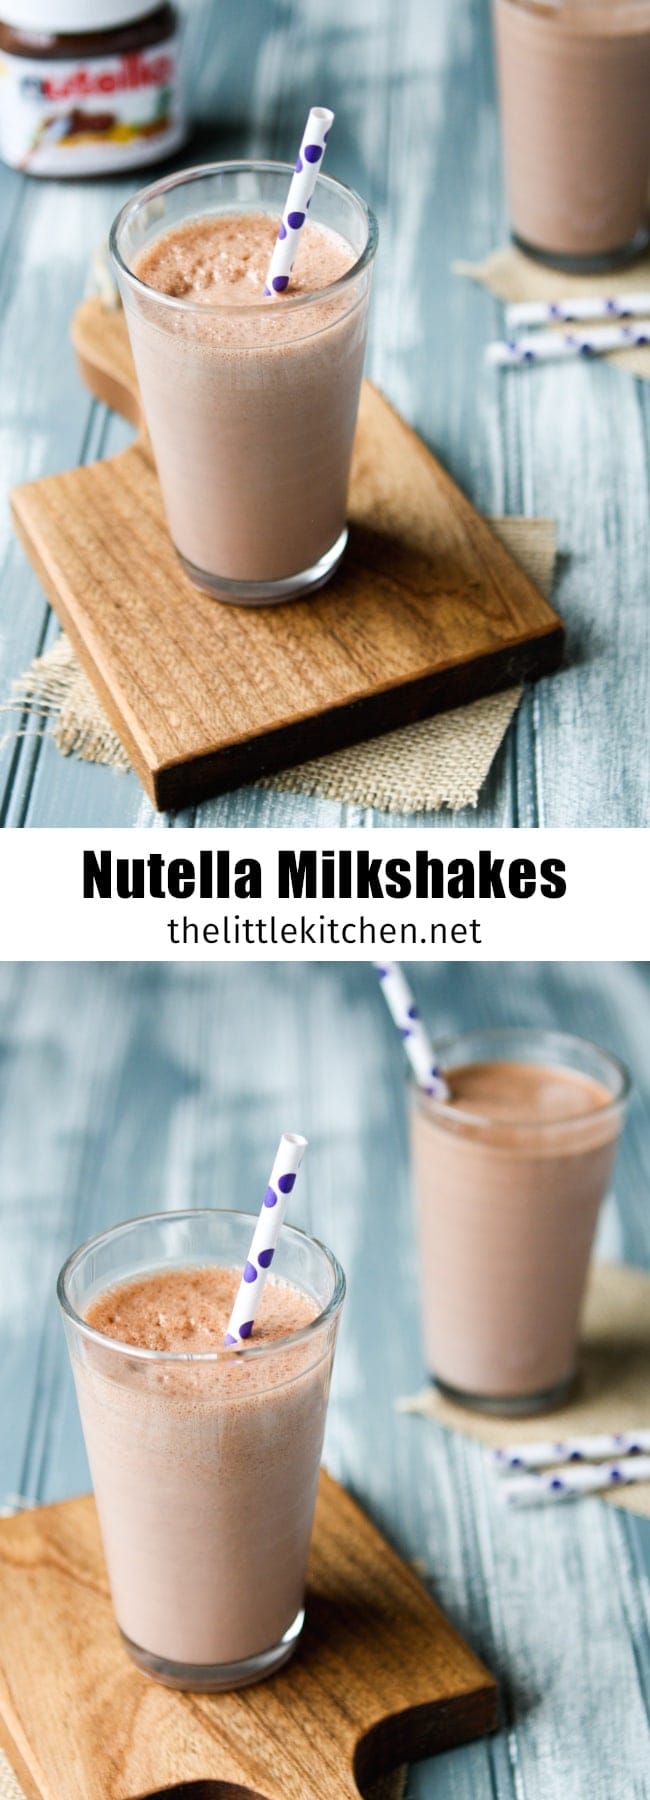 (this is wonderful and easy to make!) Nutella Milkshakes from thelittlekitchen.net